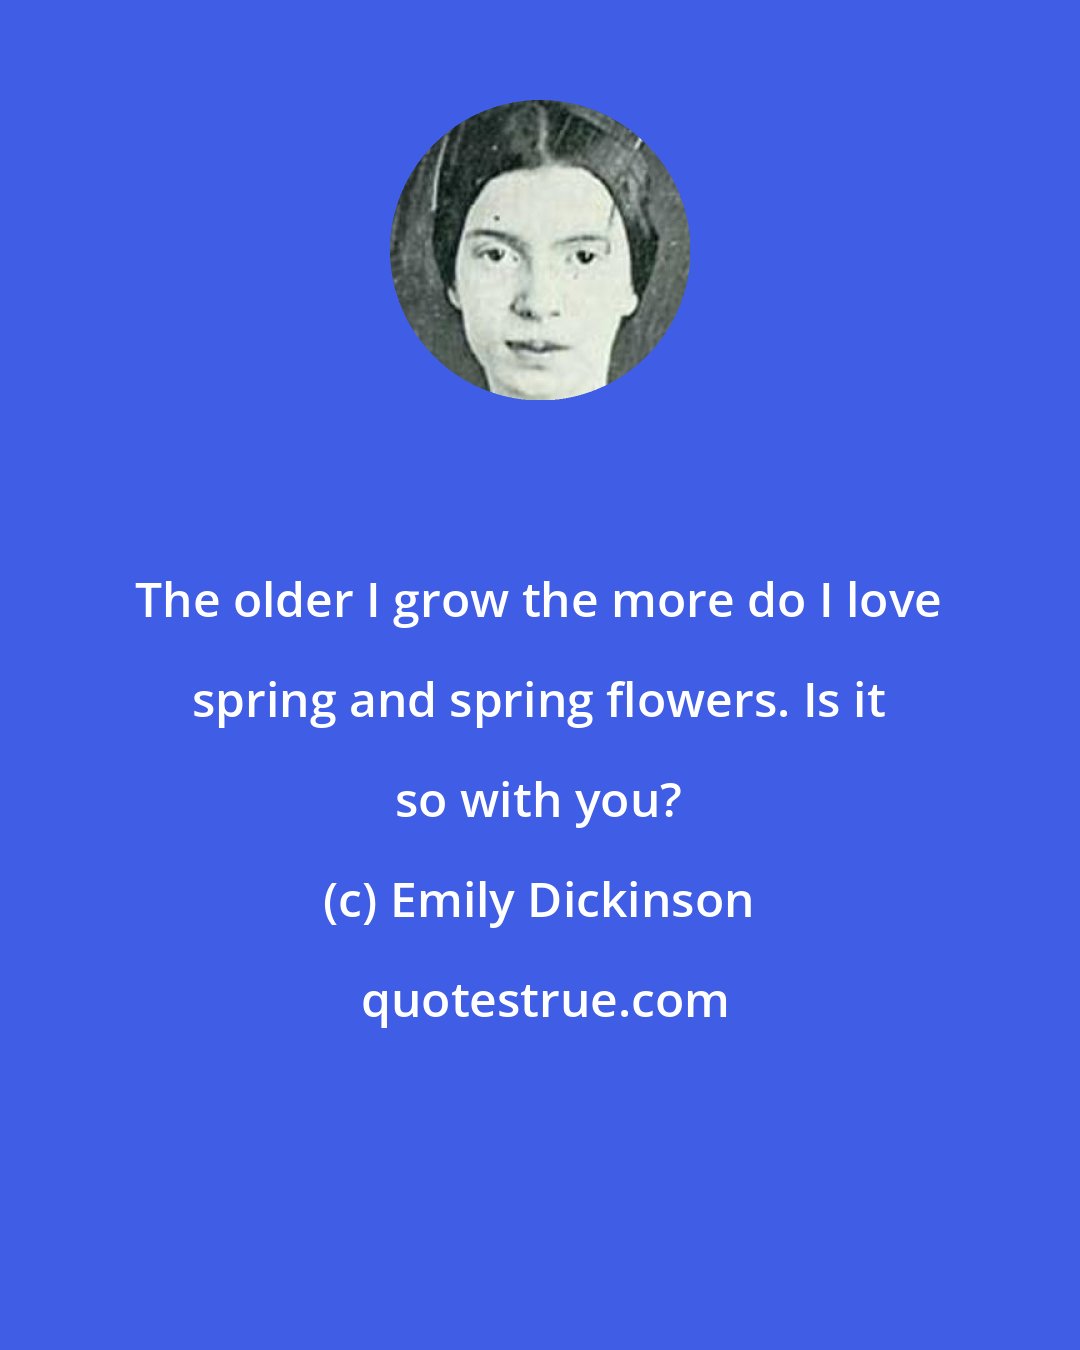 Emily Dickinson: The older I grow the more do I love spring and spring flowers. Is it so with you?